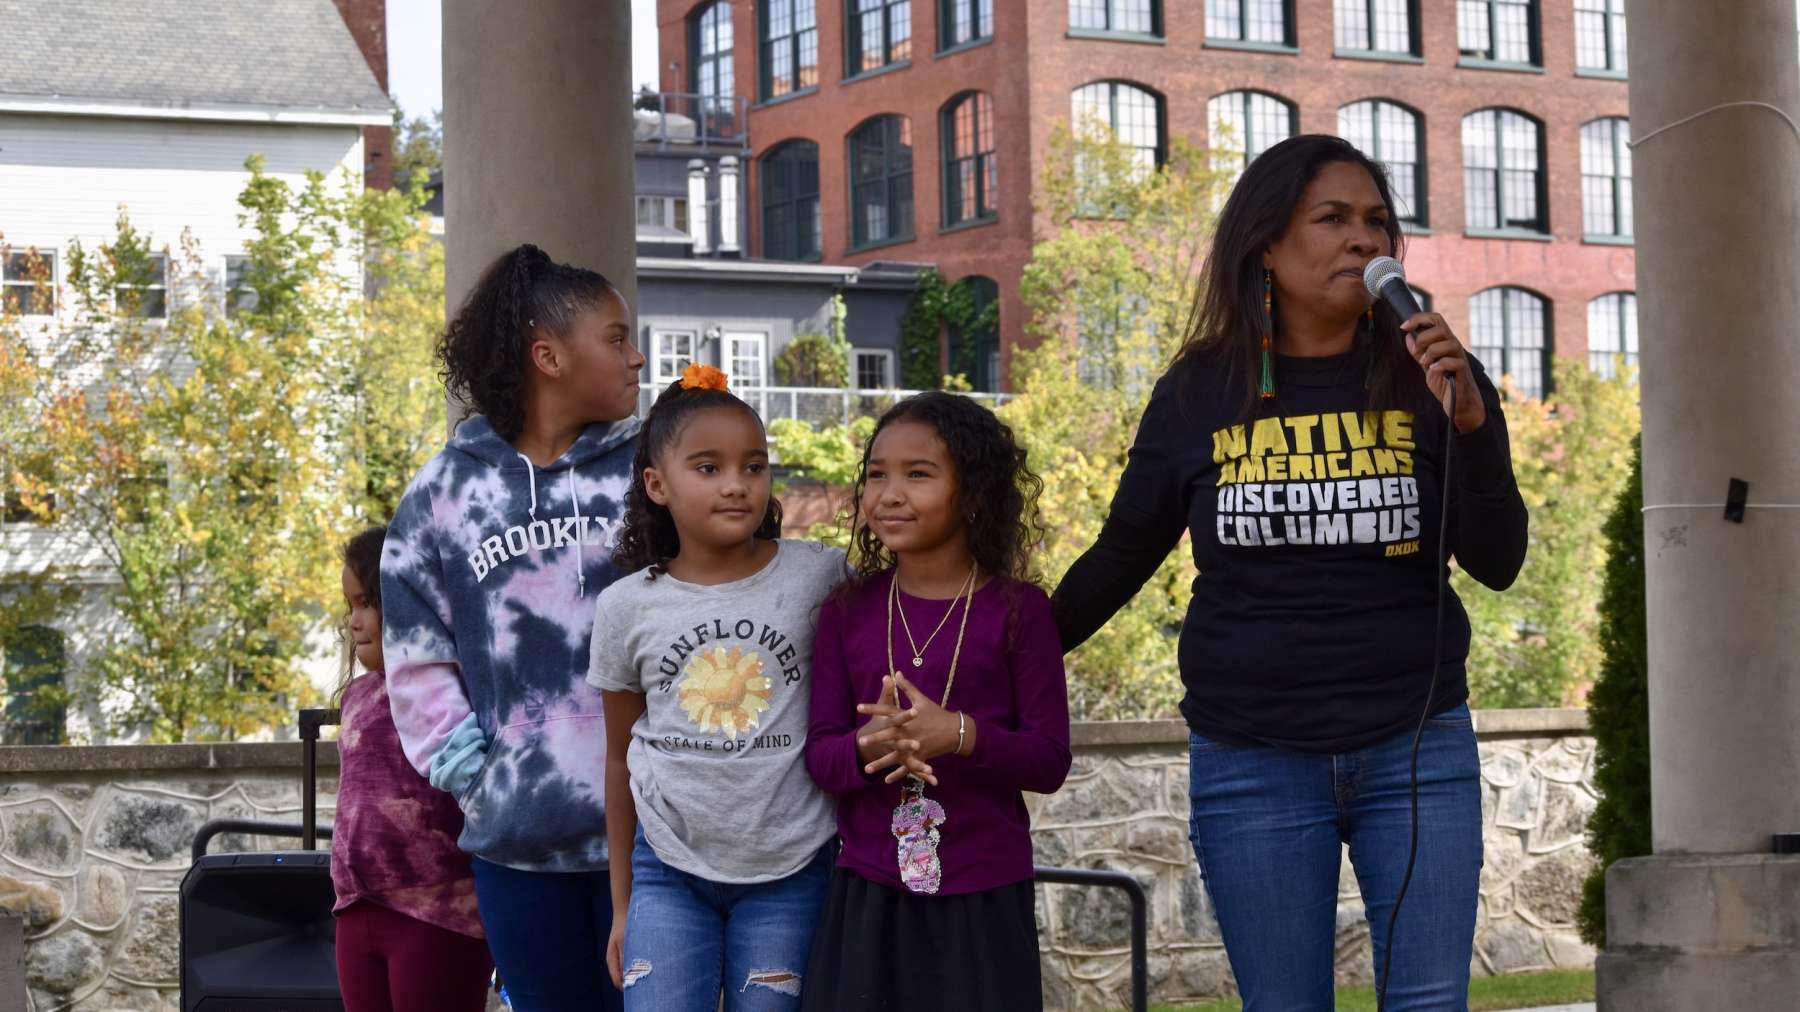 Indigenous people and allies protest new Blackstone statue and Columbus Day in Pawtucket